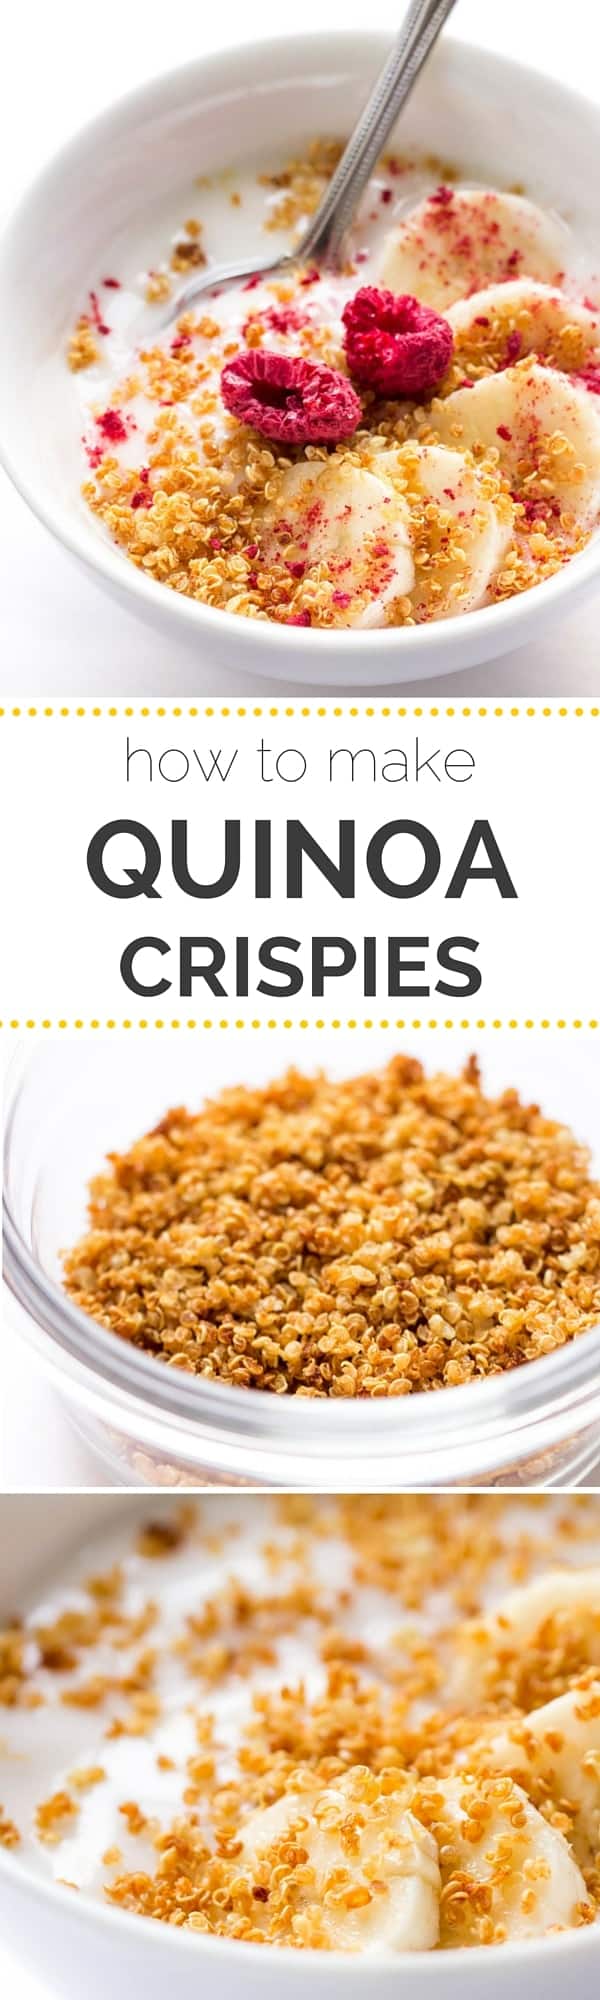 Super easy homemade QUINOA CRISPIES -- you'll love how simple this recipe is, only 1 ingredient and 30 minutes. PLUS you'll start adding quinoa crispies to everything!